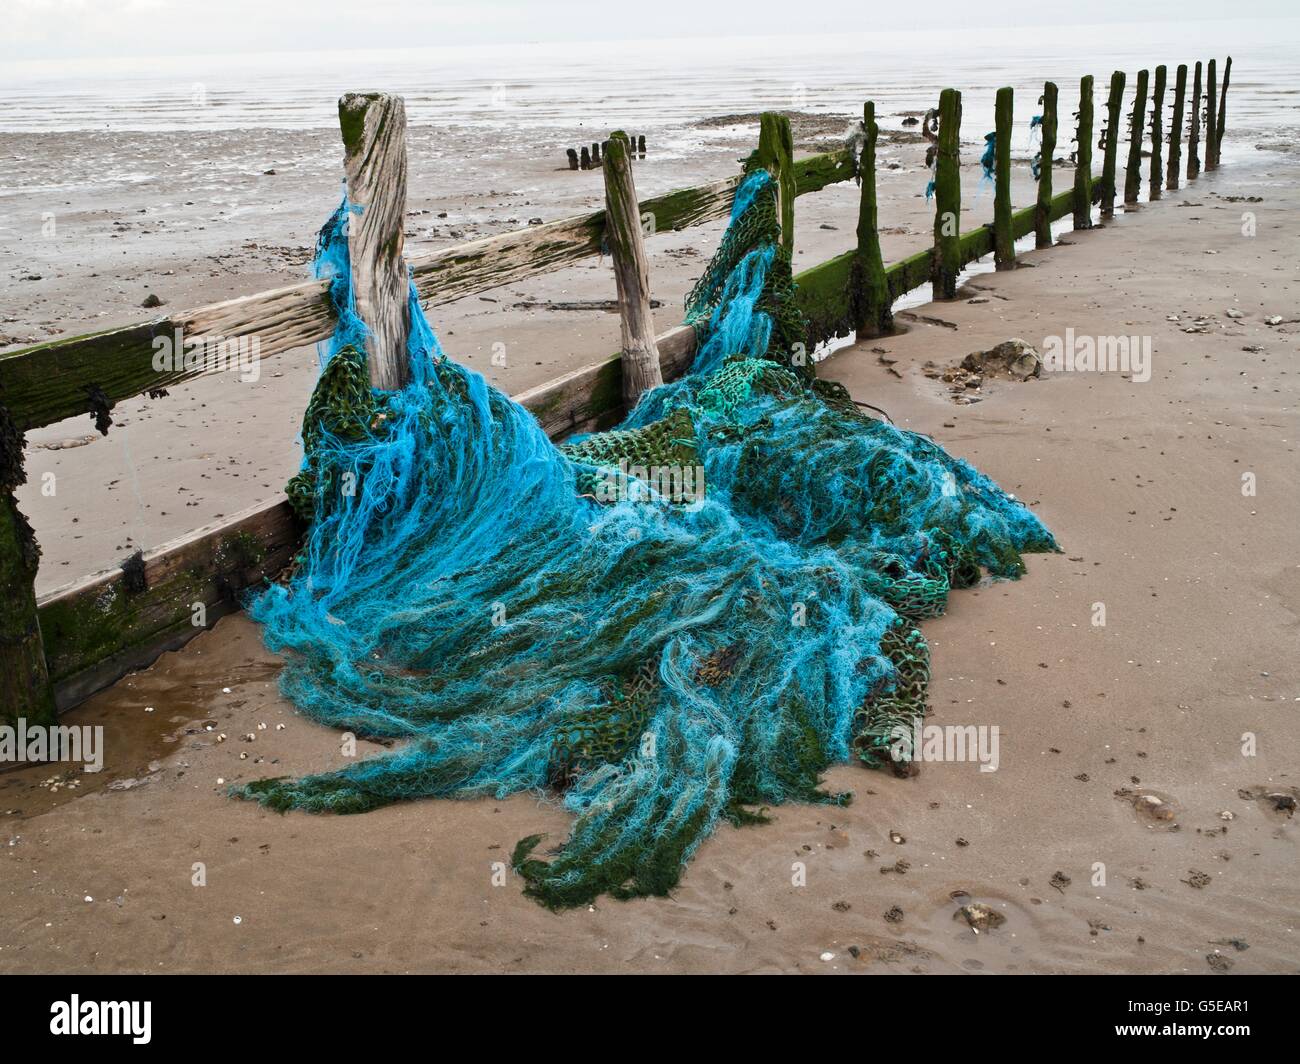 Mermaid found washed up on the beach in a fishing net